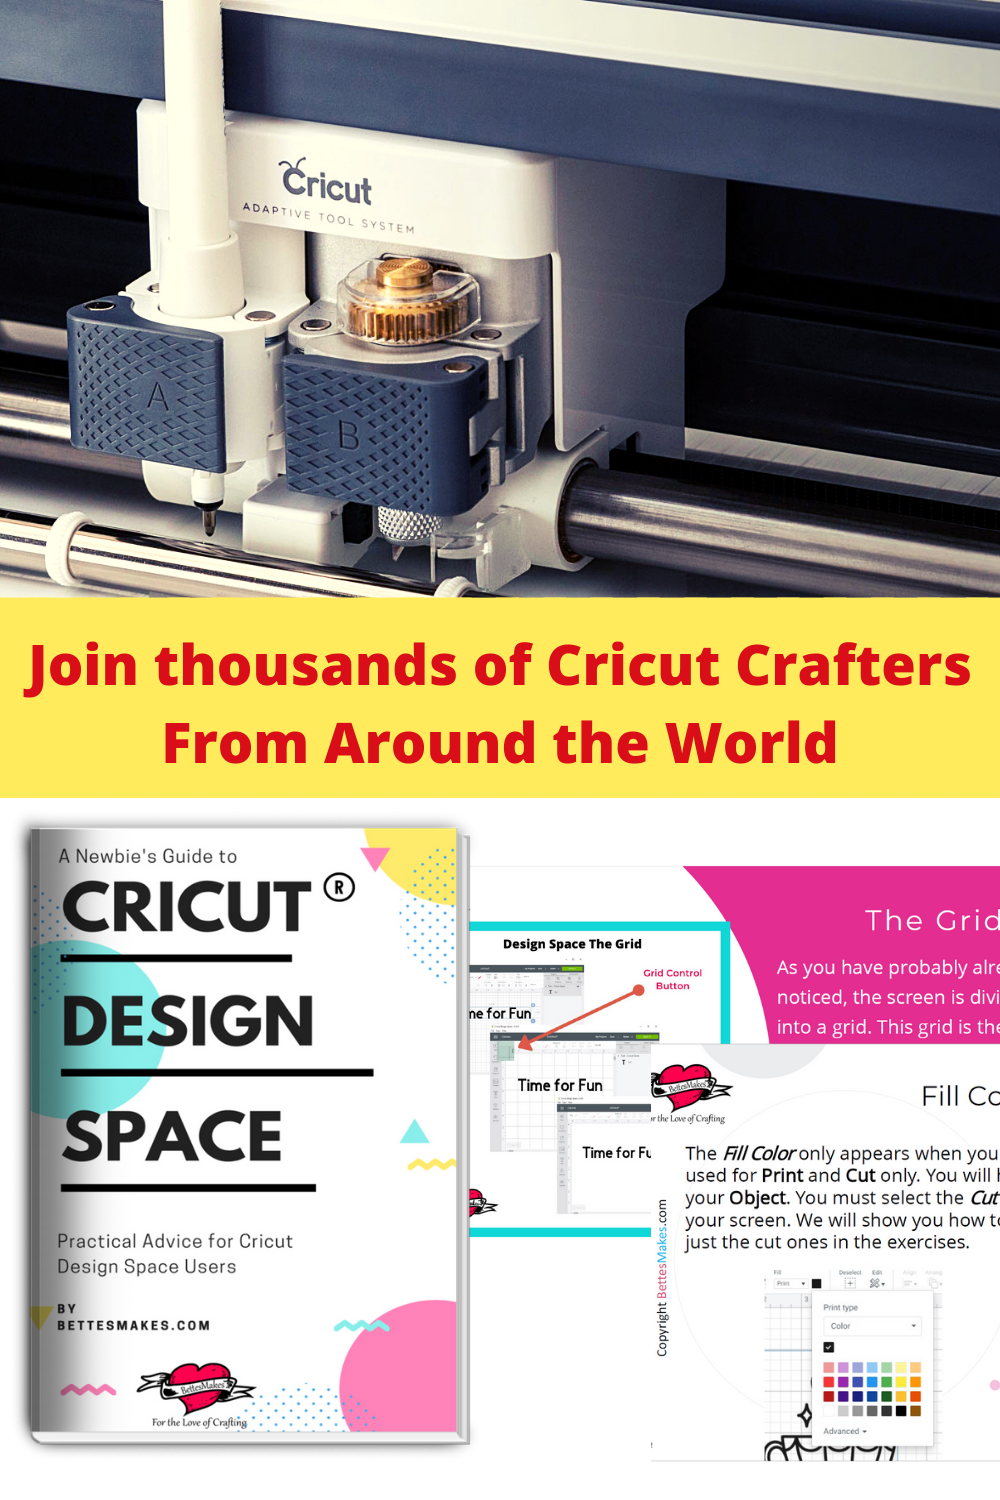 Cricut Accessories and Materials: All Cricut Tools That You Will Ever Need To Spark Creativity, Perfect Your Objects And Use Design Space To Its Fullest Capacity Even If You Are Just Starting Out [Book]